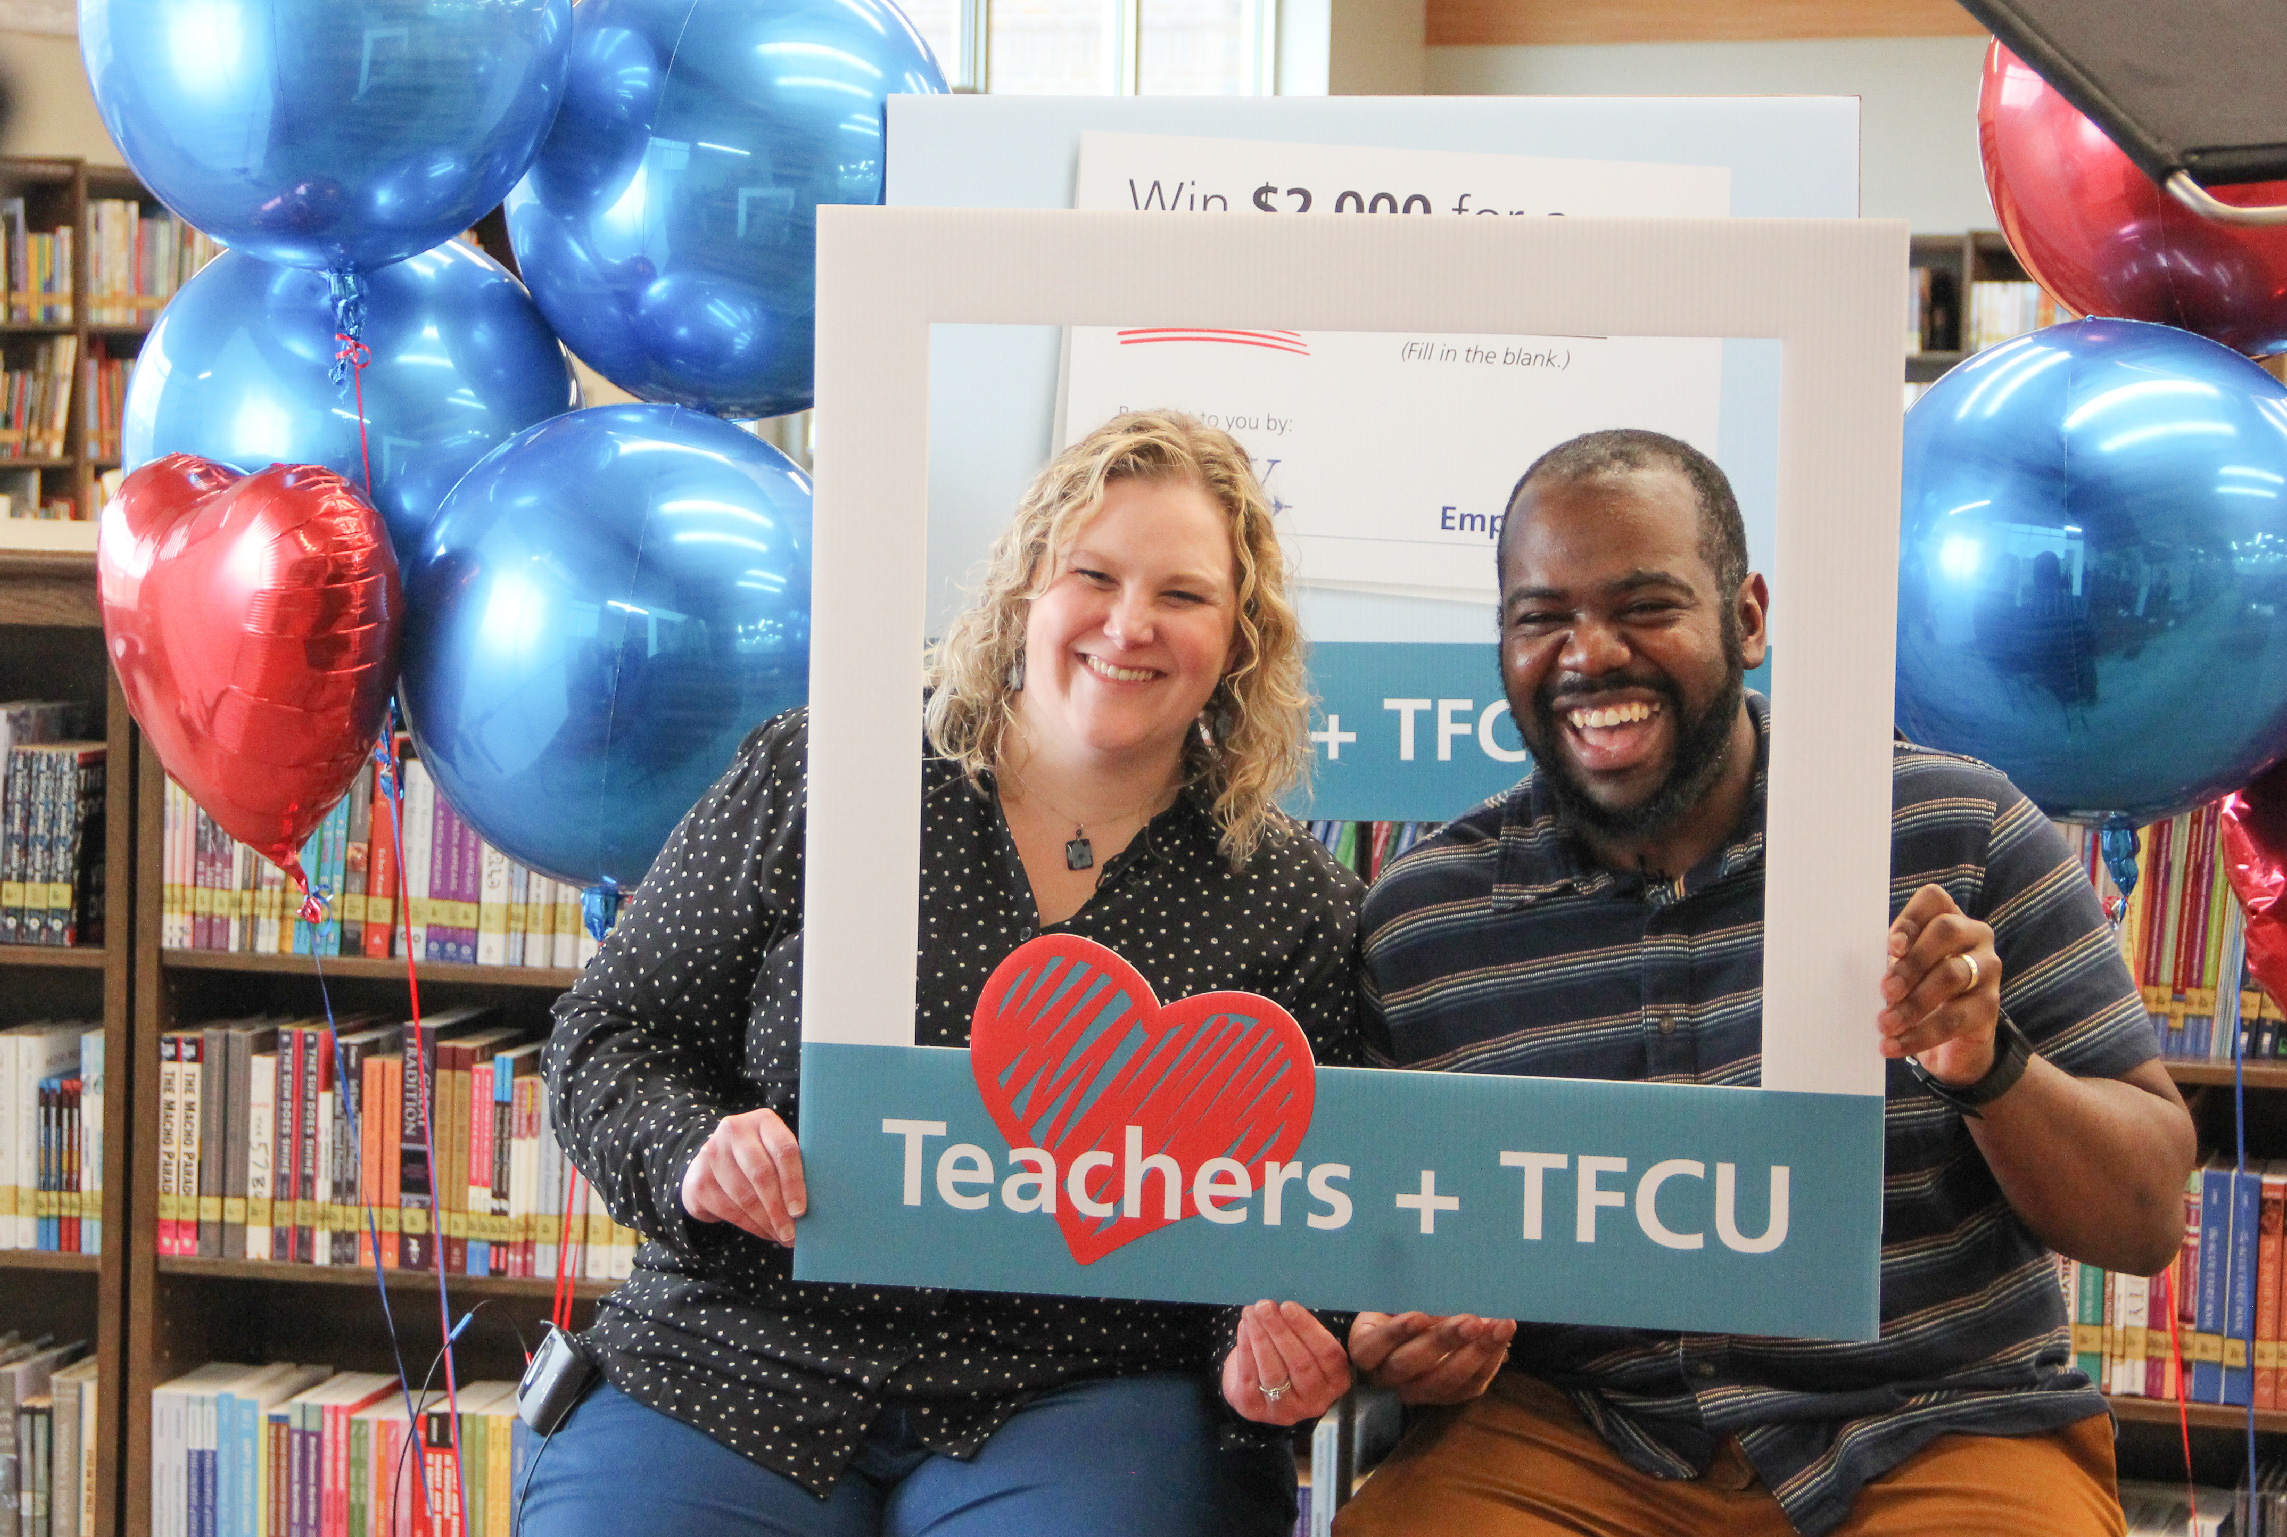 Two people holding up a sign that says Teachers + TFCU